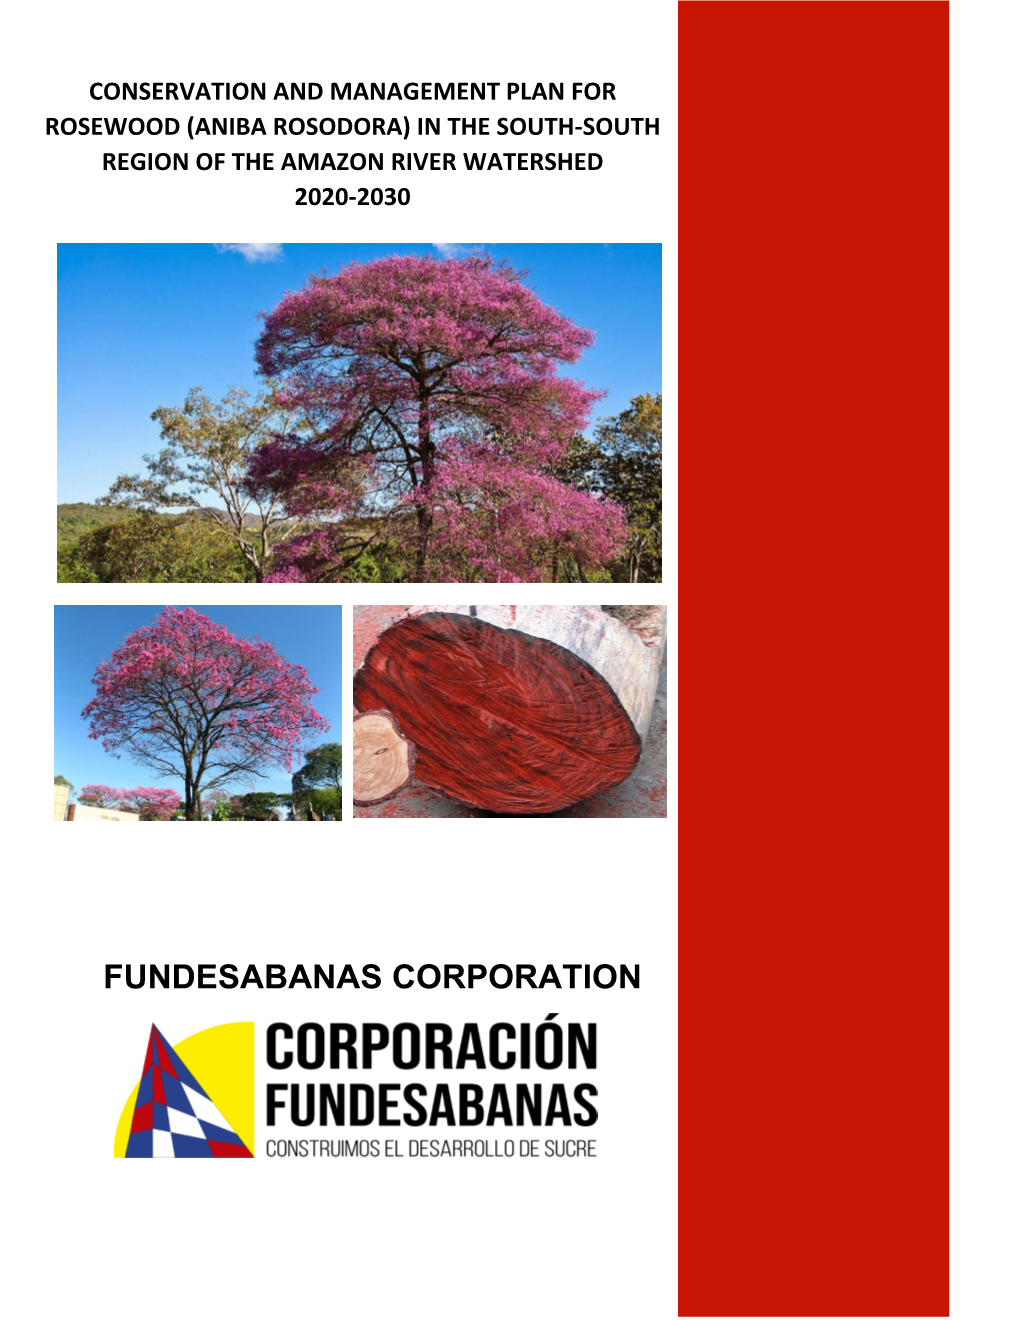 Conservation-And-Management-Plan-For-Rosewood-Aniba-Rosodora